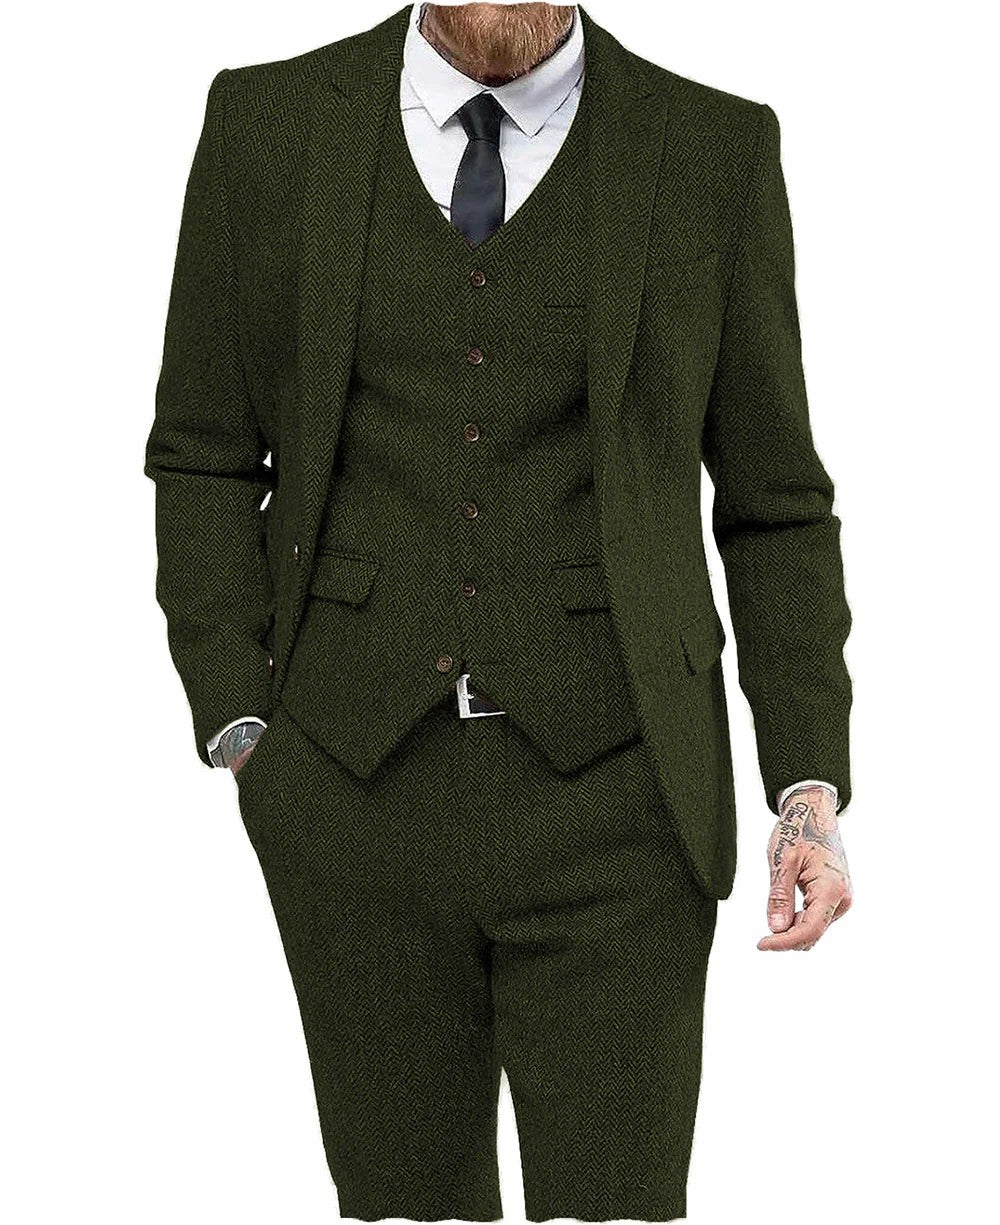 A Complete Guide to Men's Suit Styles